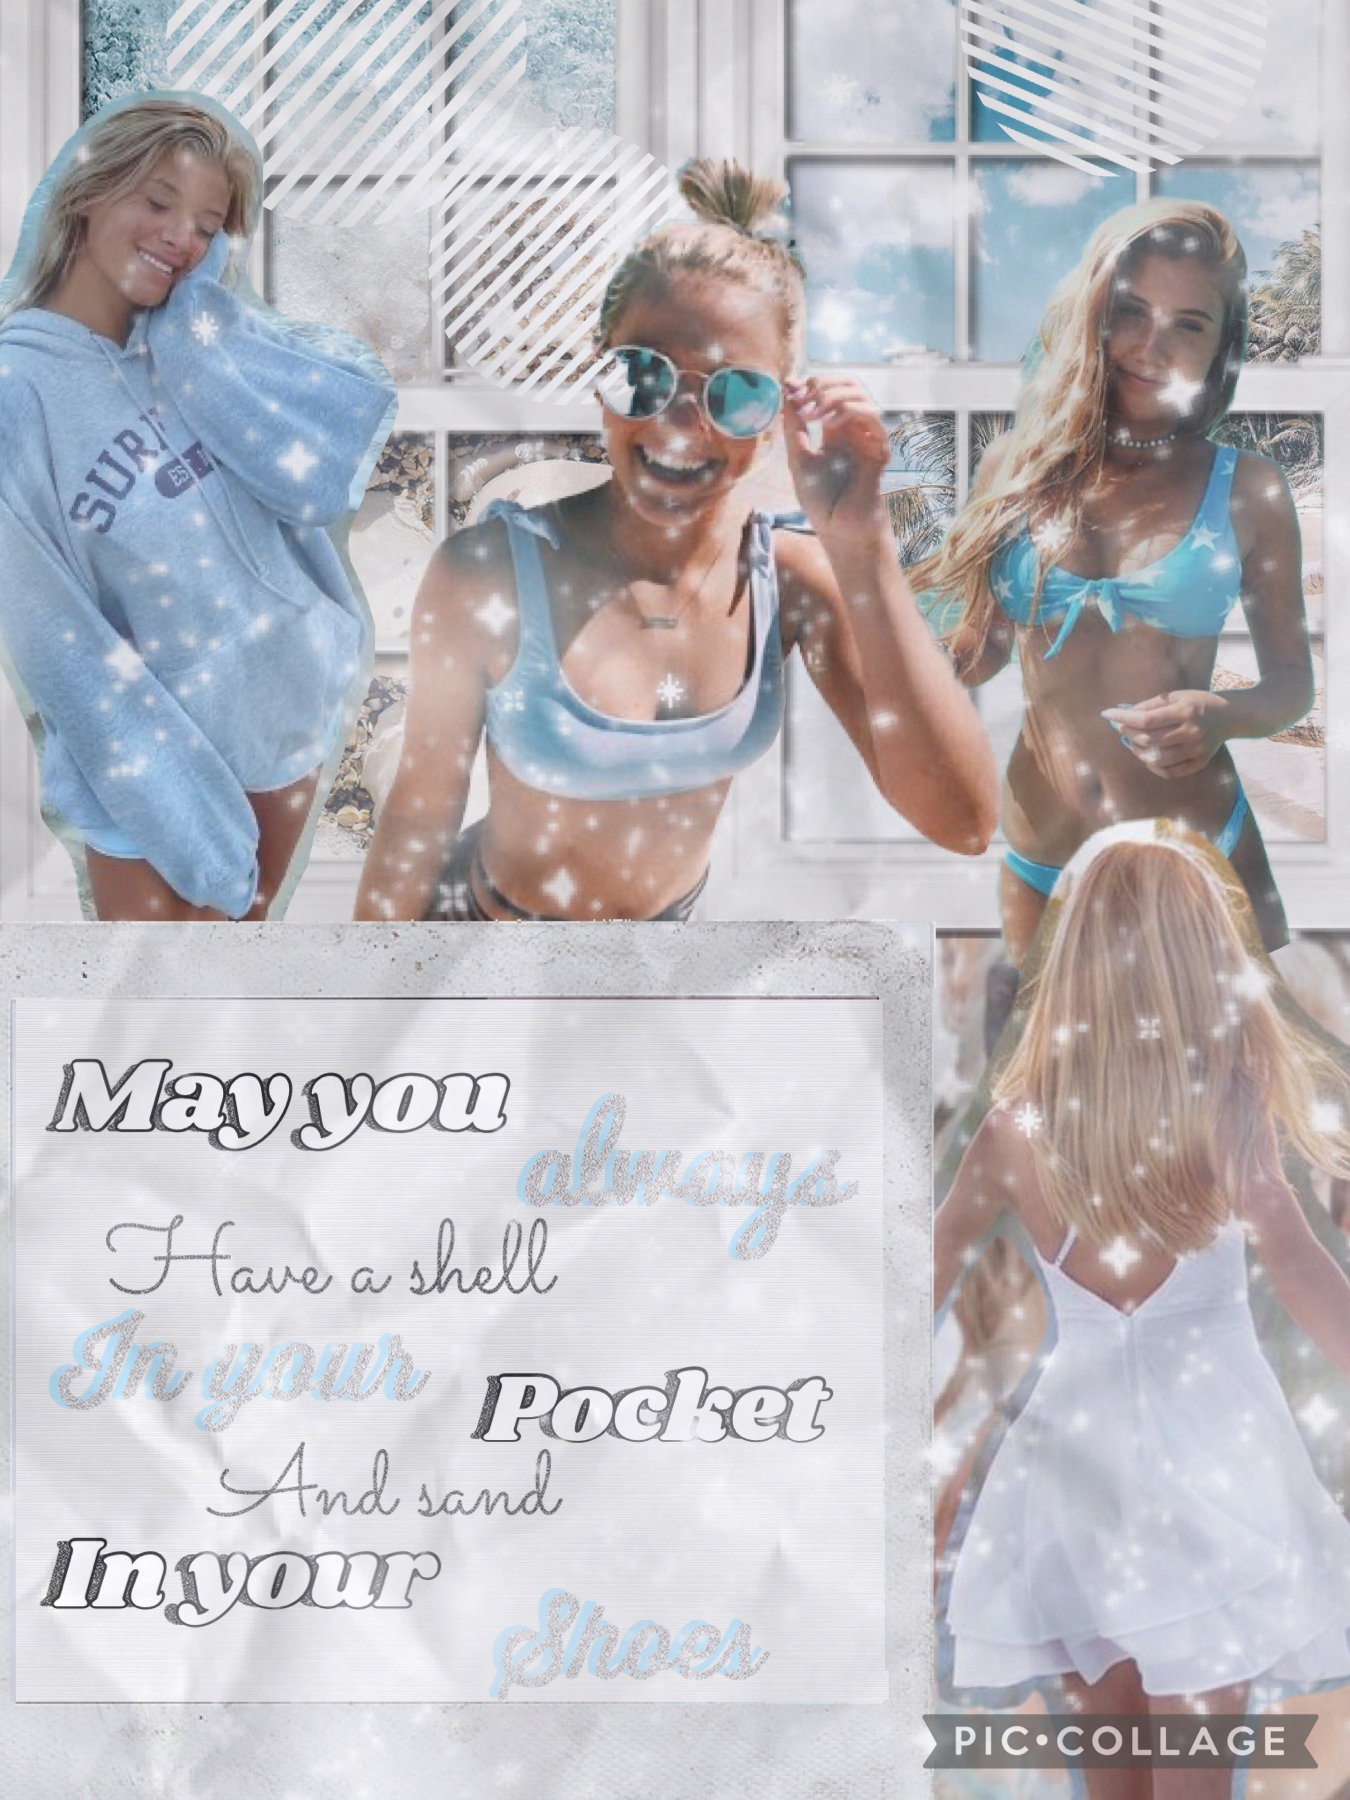 🌊Tap 🌊
Hello everyone I really love this collage I made it’s my favorite now lol! How are you all I am starting to get more active so you can ask if we can collab if you want have a wounded fly day flowers bye!😊